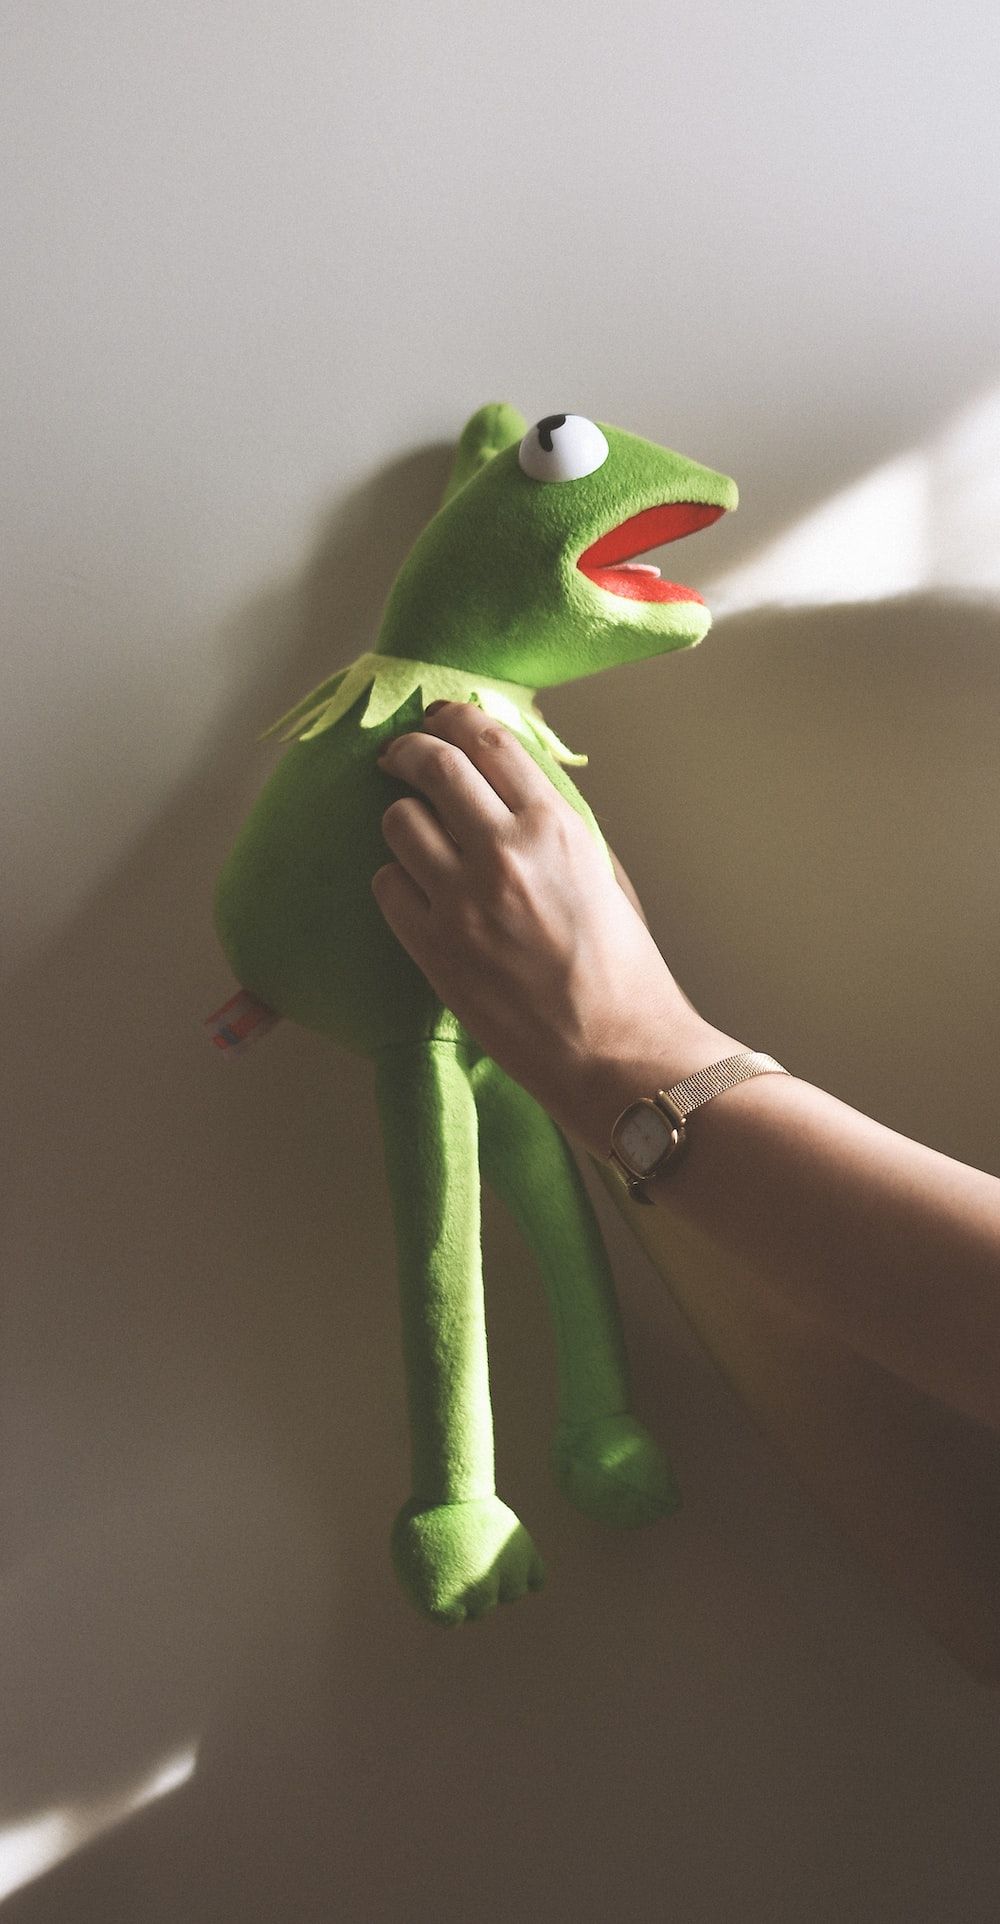 A person holding up the muppet stuffed animal - Kermit the Frog